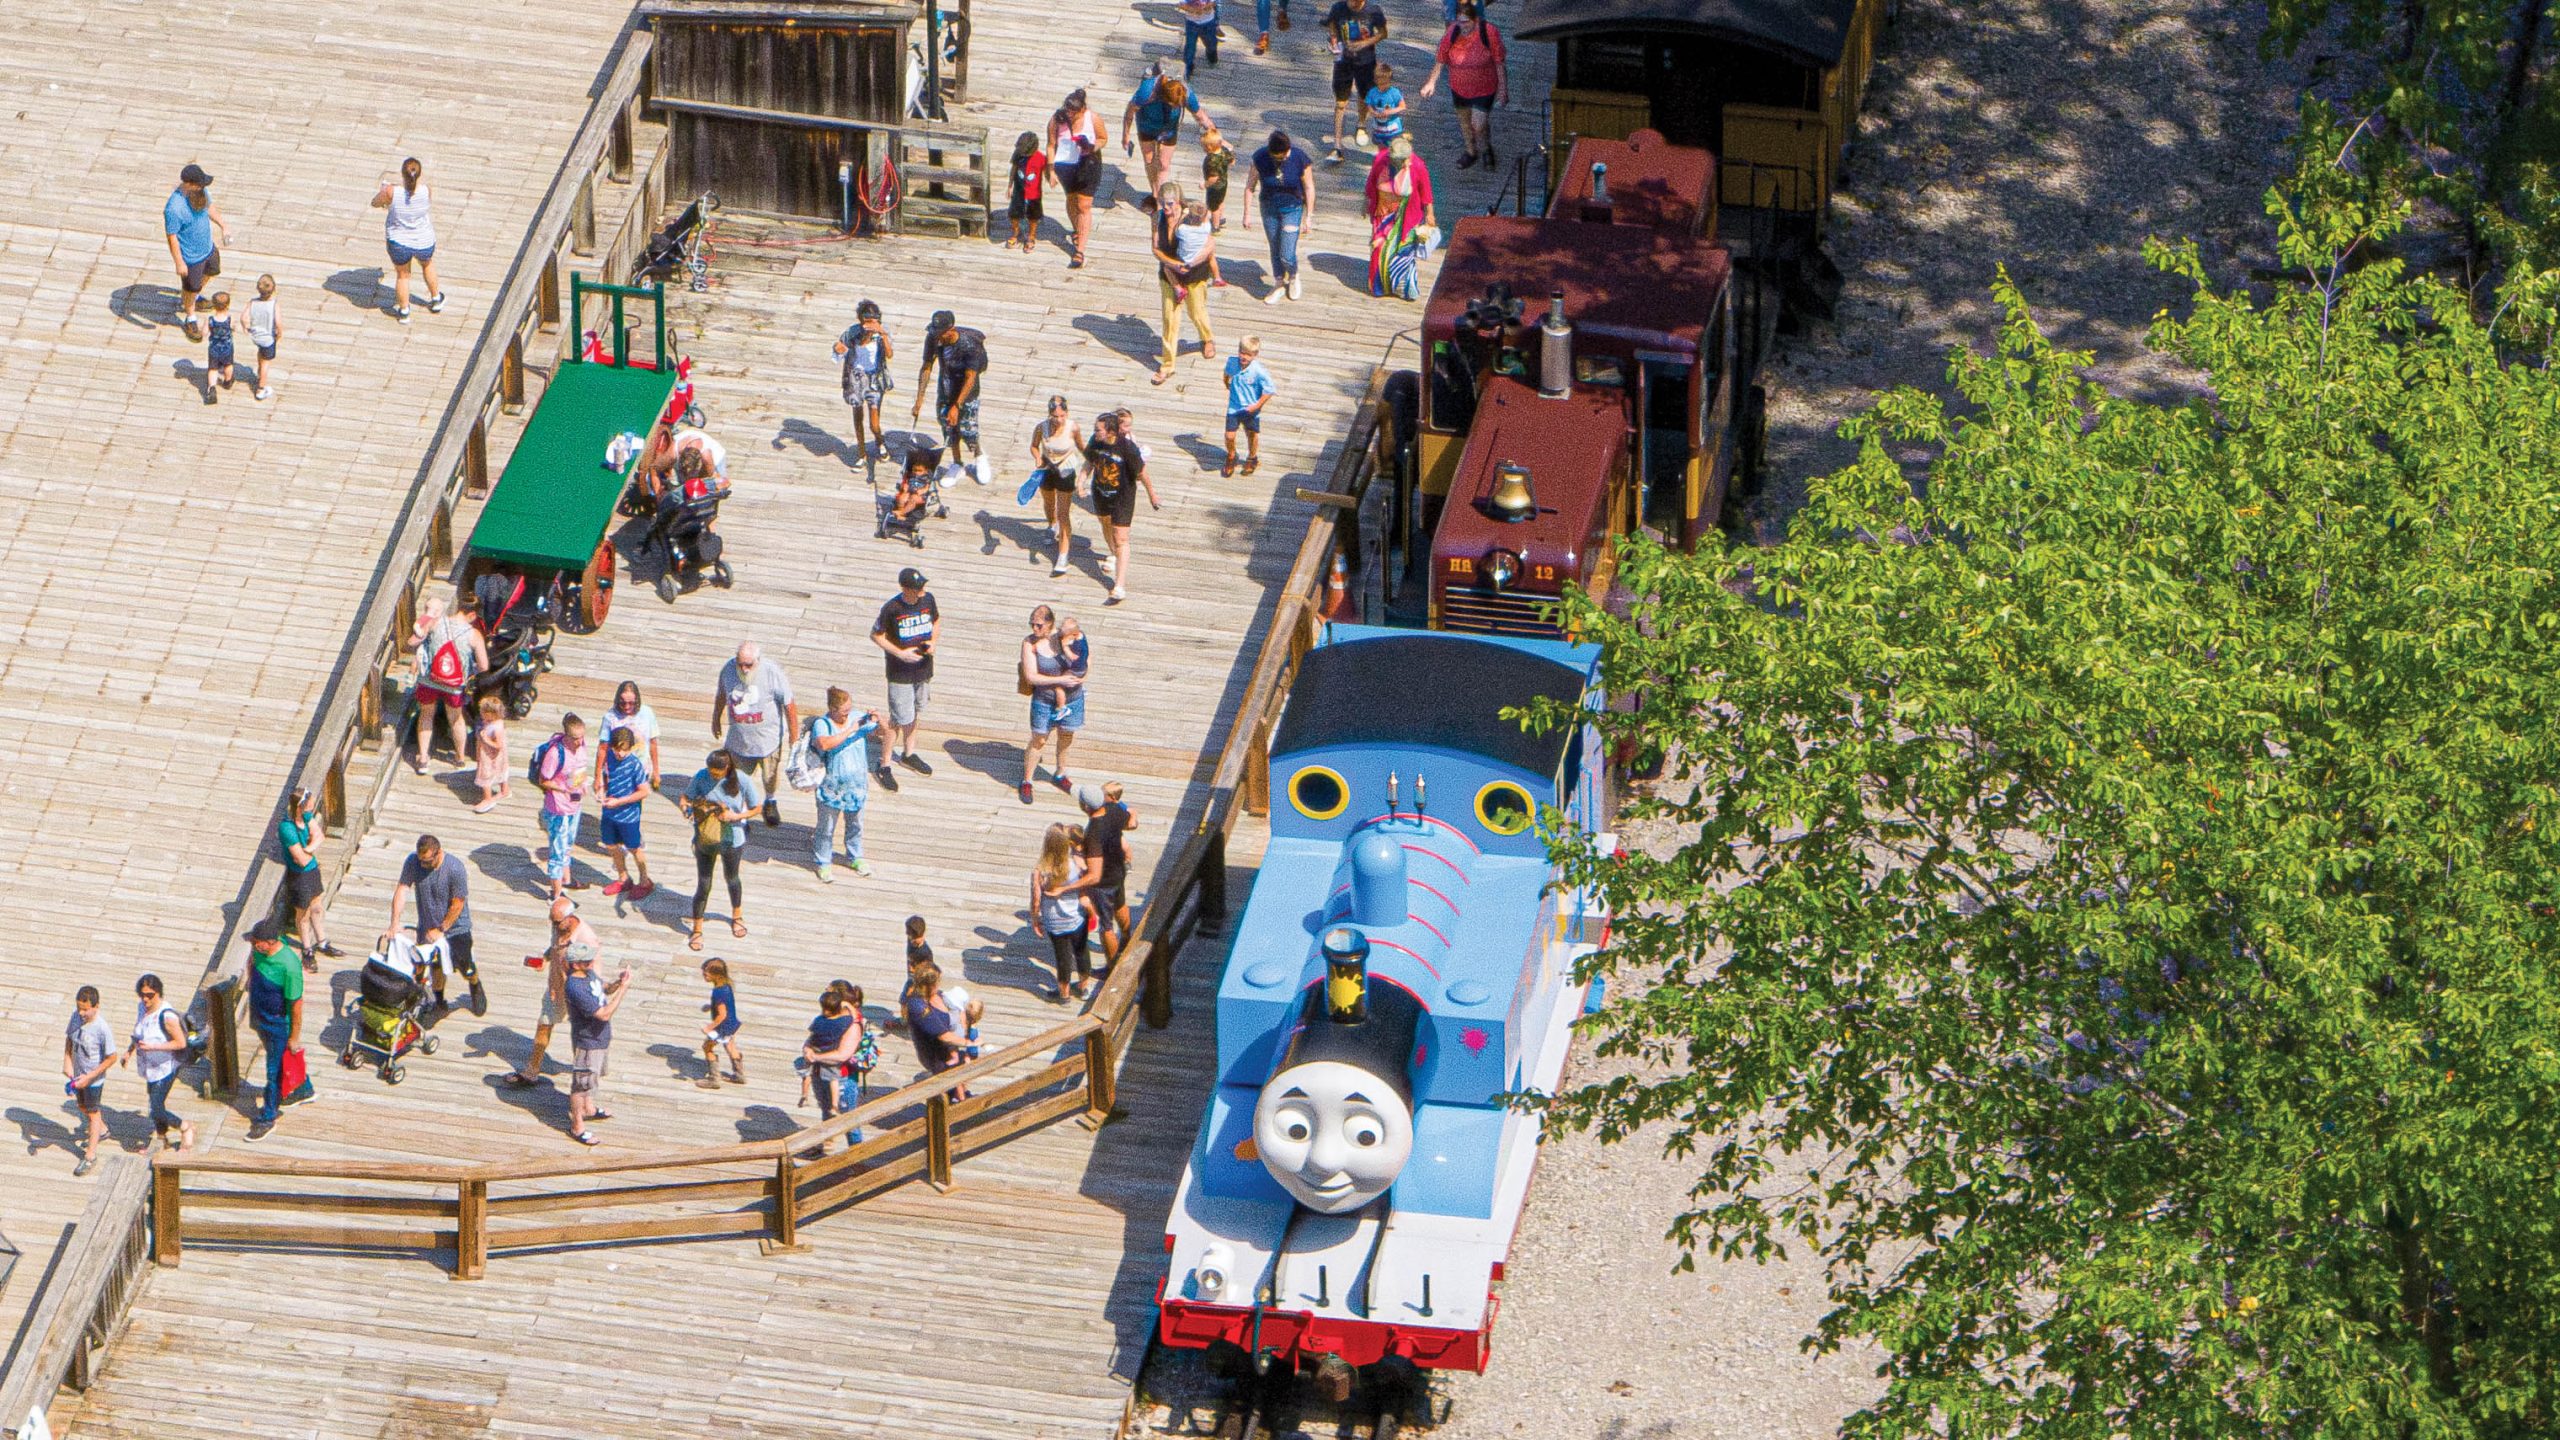 Visitors to Crossroads Village disembark a coal-powered antique train that has cartoon Thomas the Train as the engine.